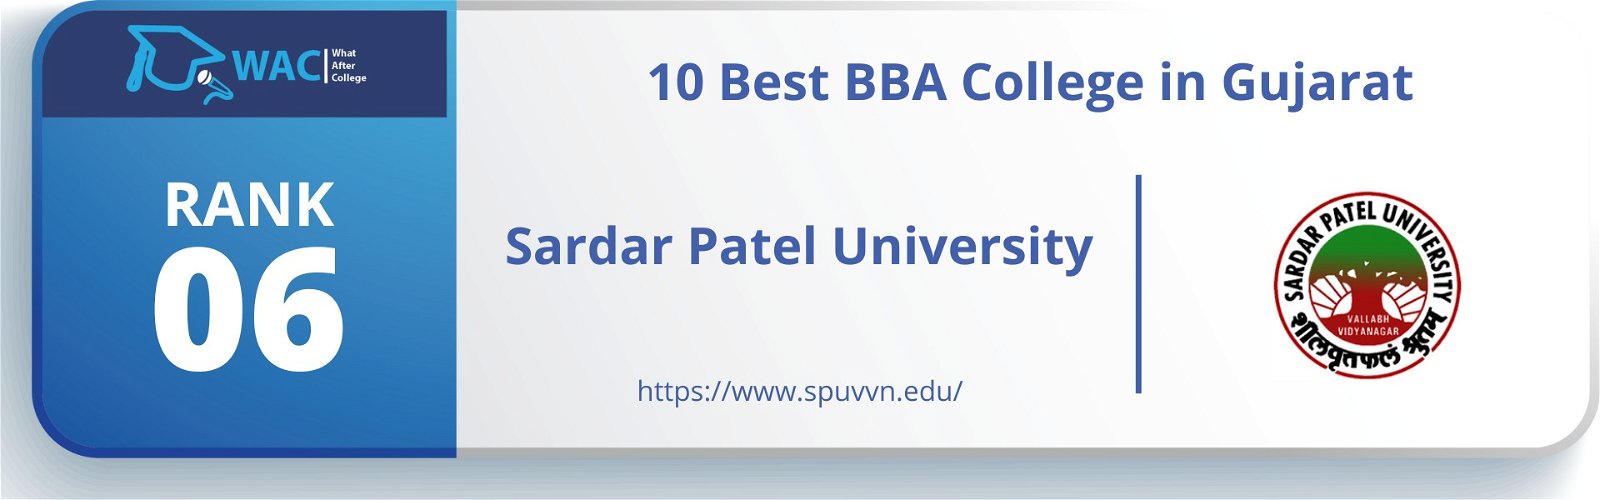 bba colleges in gujarat